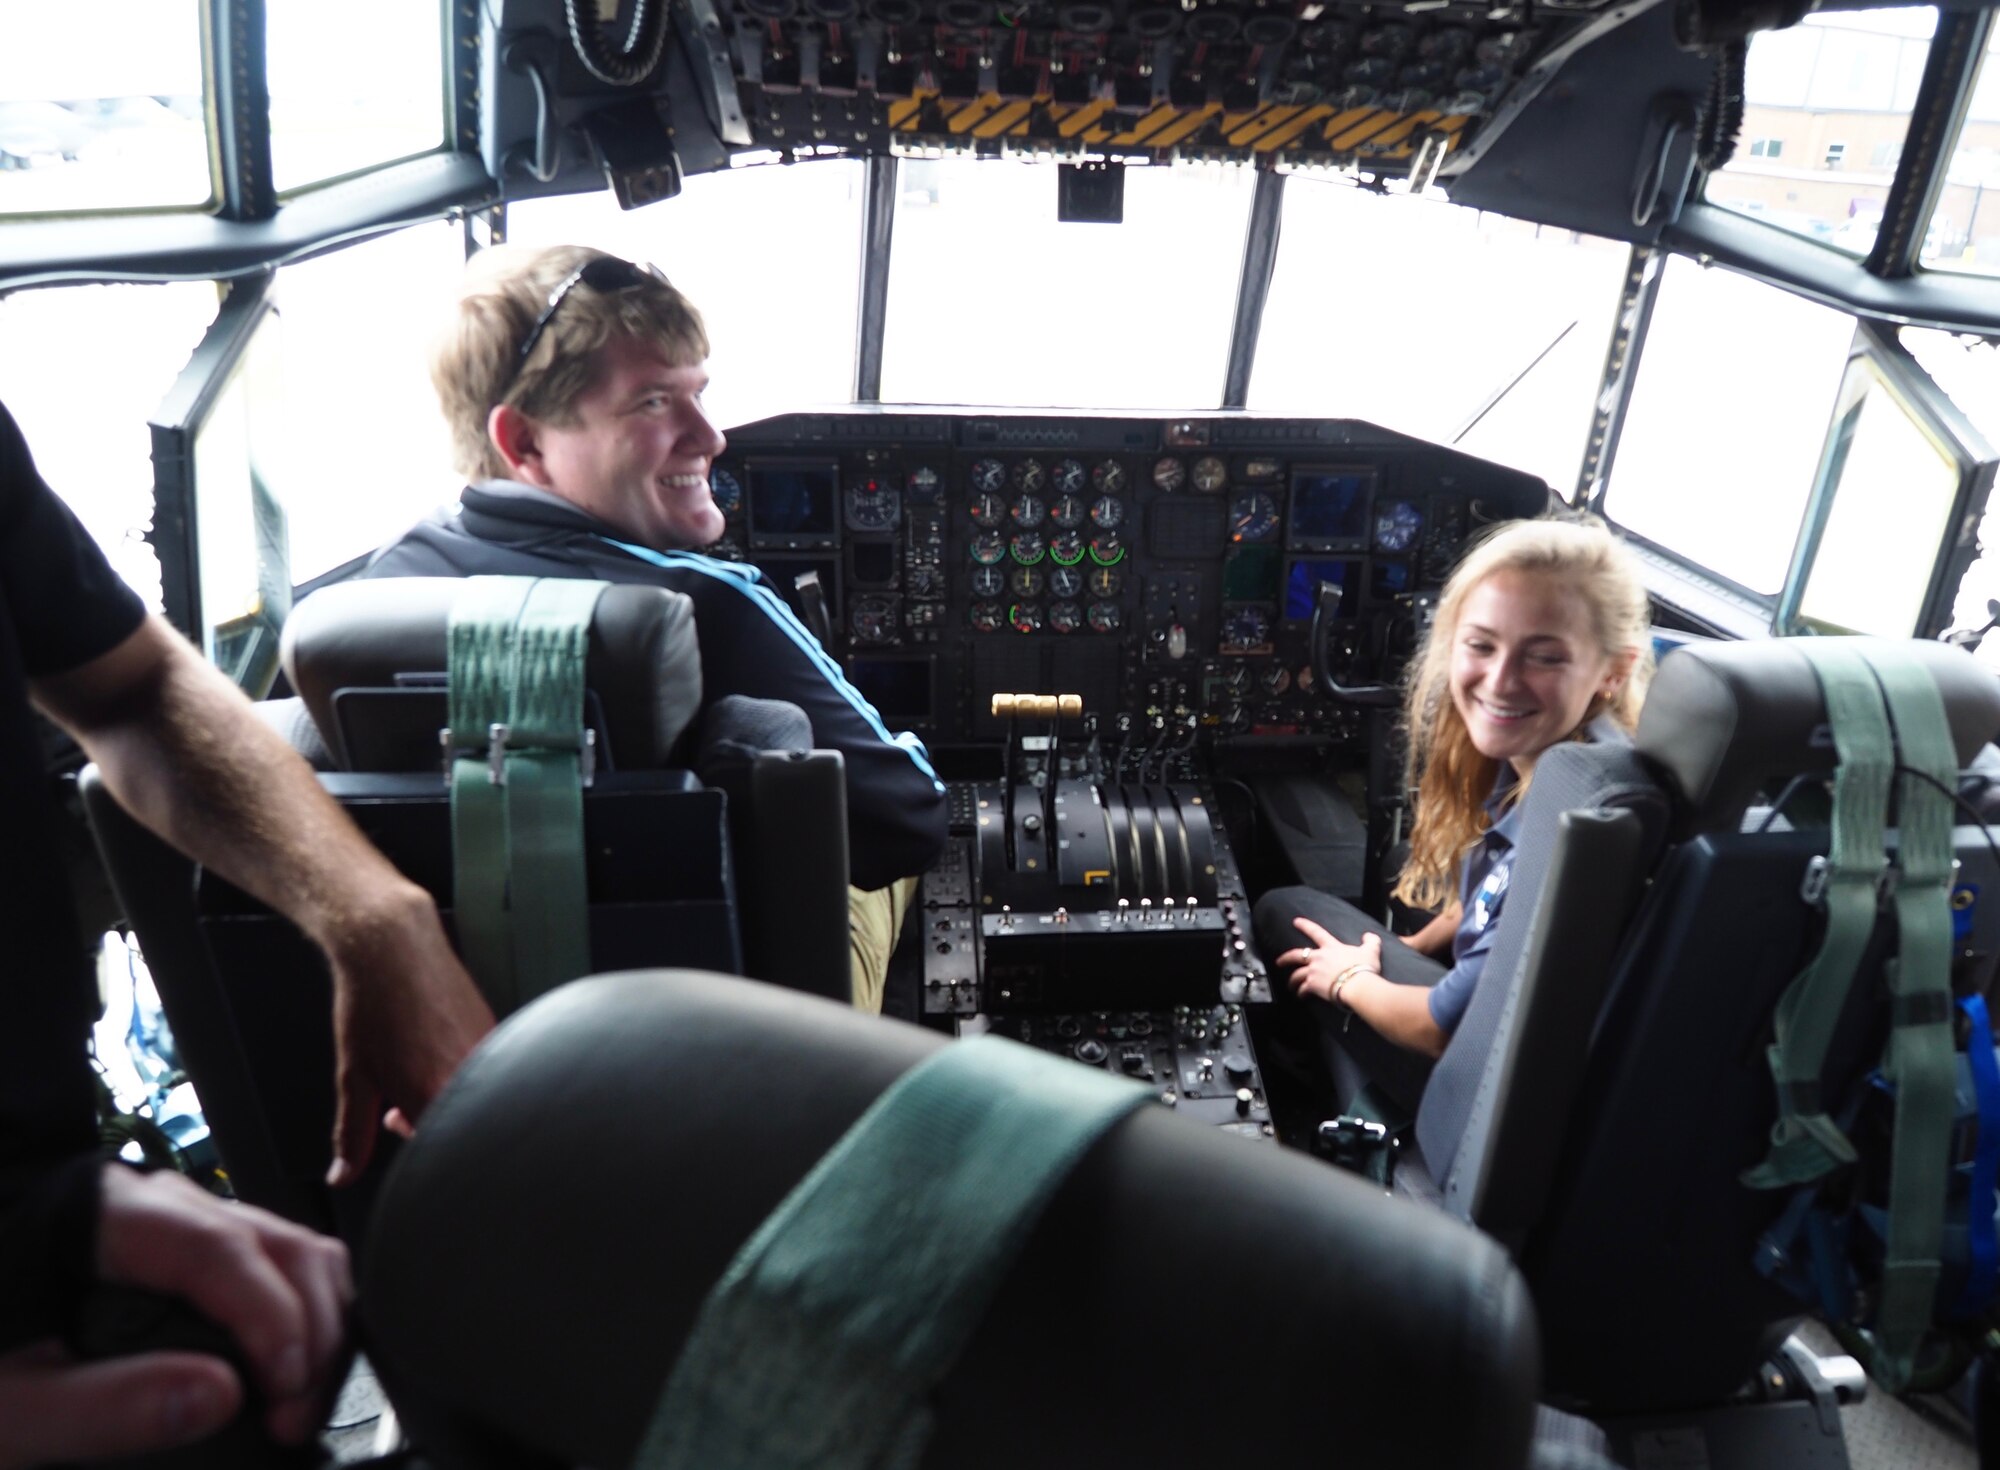 Members of the Minnesota United F.C. toured a 934th Airlift Wing C-130 June 25 after sponsoring participating in a Military Youth Soccer Clinic at the Minneapolis-St. Paul Air Reserve Station. (Photo by Paul Zadach)